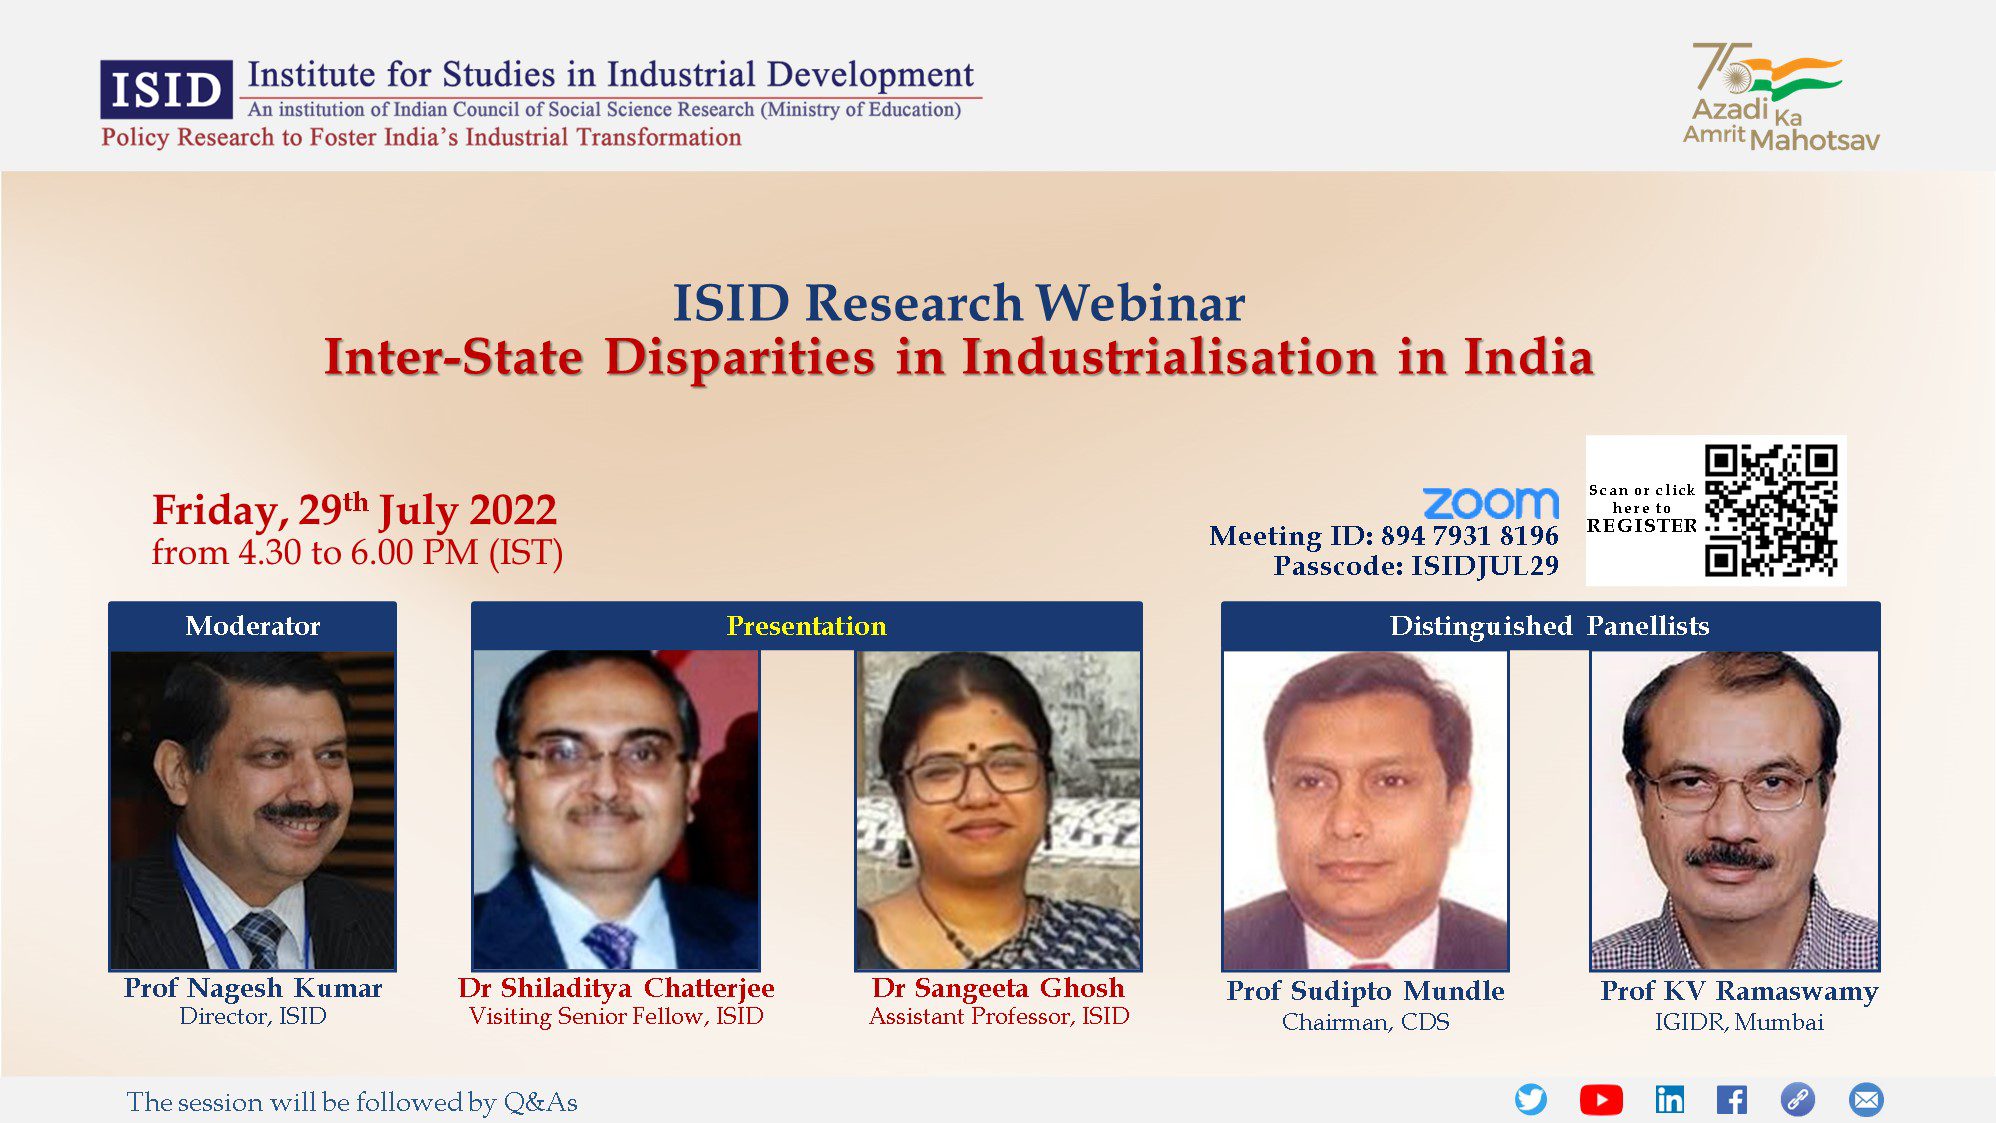 ISID Research Webinar on Inter-State Disparities in Industrialisation In India